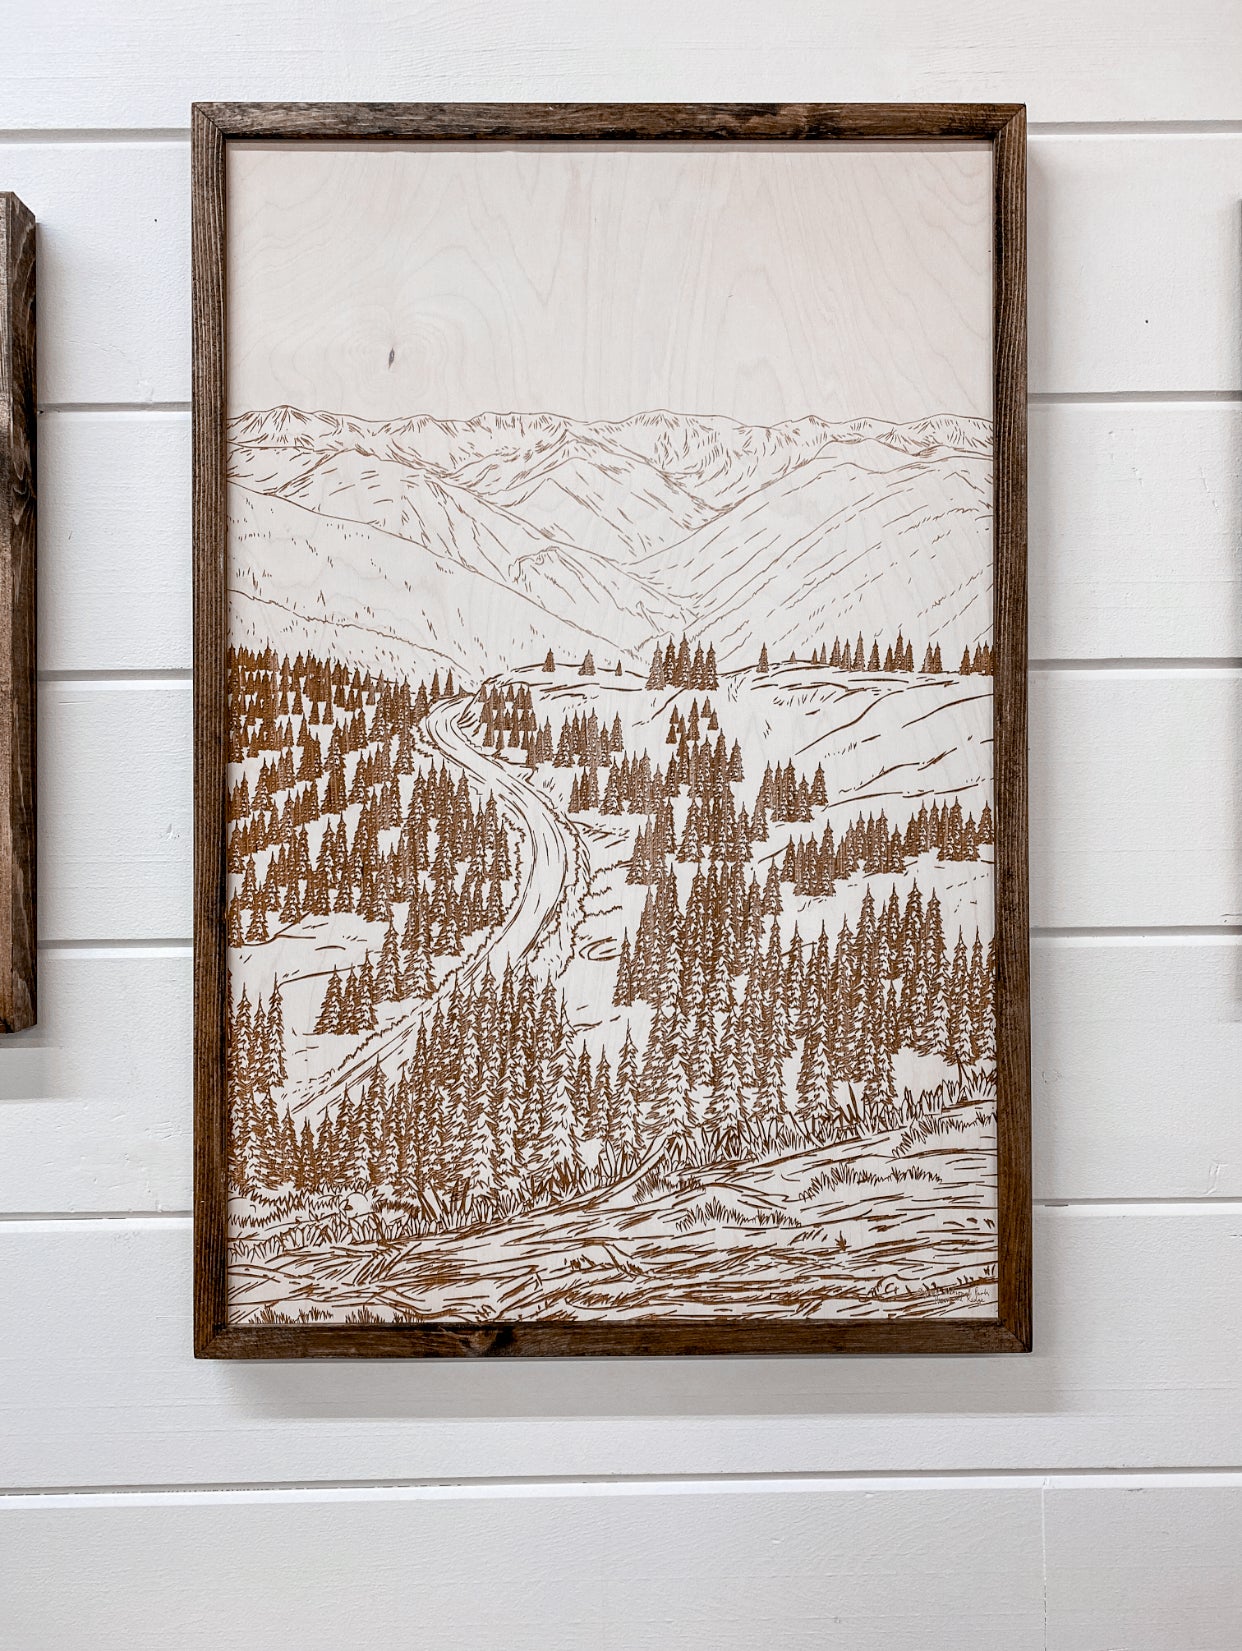 3 Piece Hand Sketched Hurricane Ridge Olympic National Park with Aztec Wood Artwork